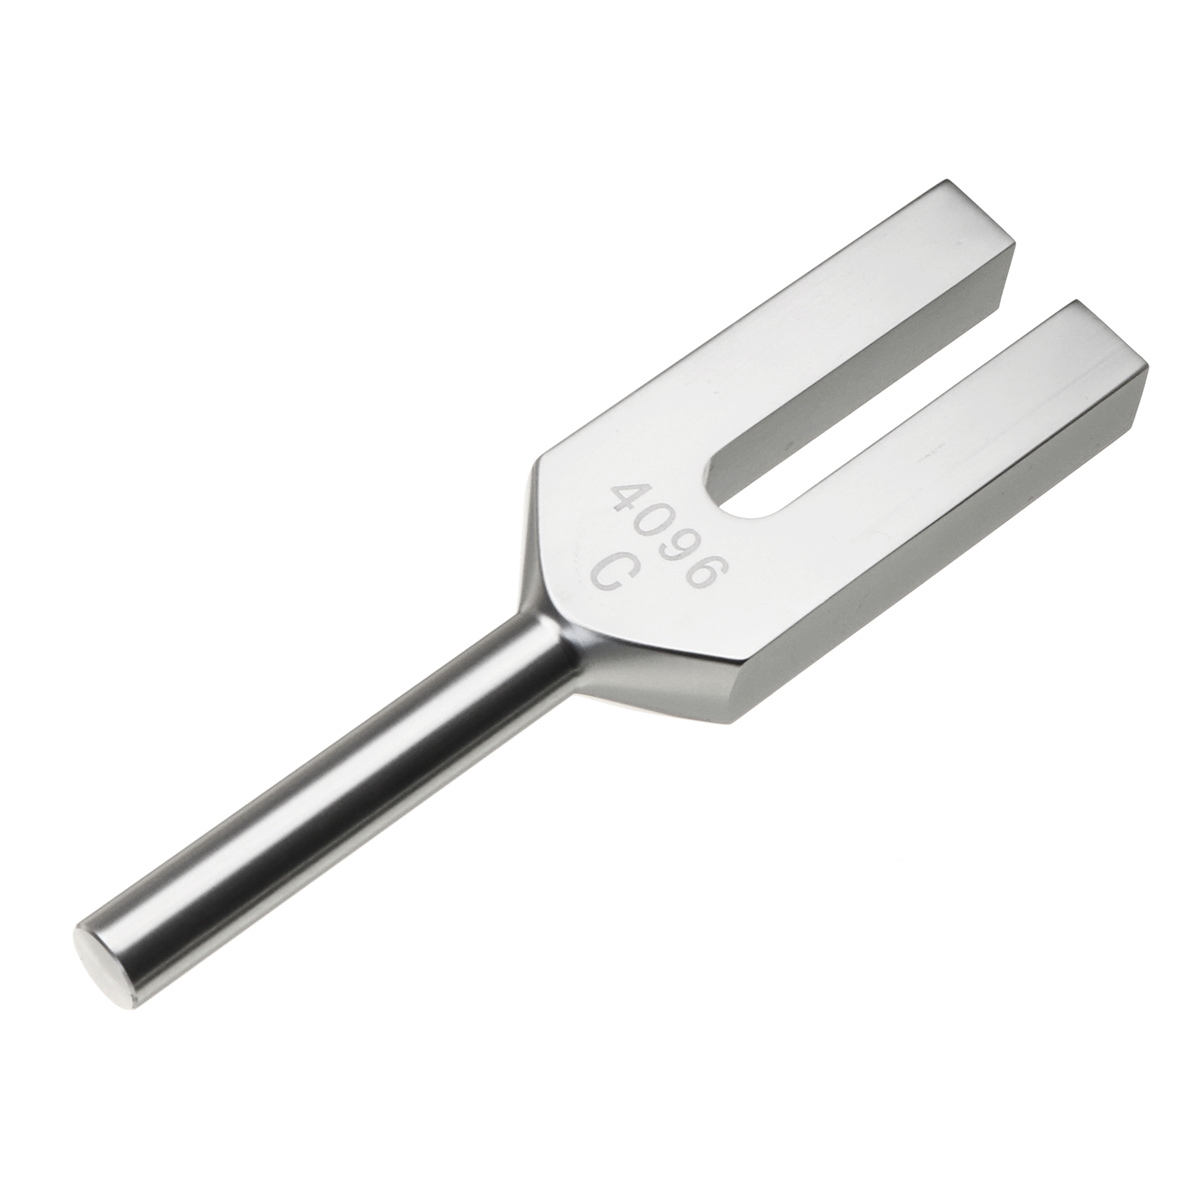 4096Hz-Aluminum-Musical-Tuning-Fork-Instrument-for-Healing-Sound-Vibration-Therapy-Tools-1282655-1